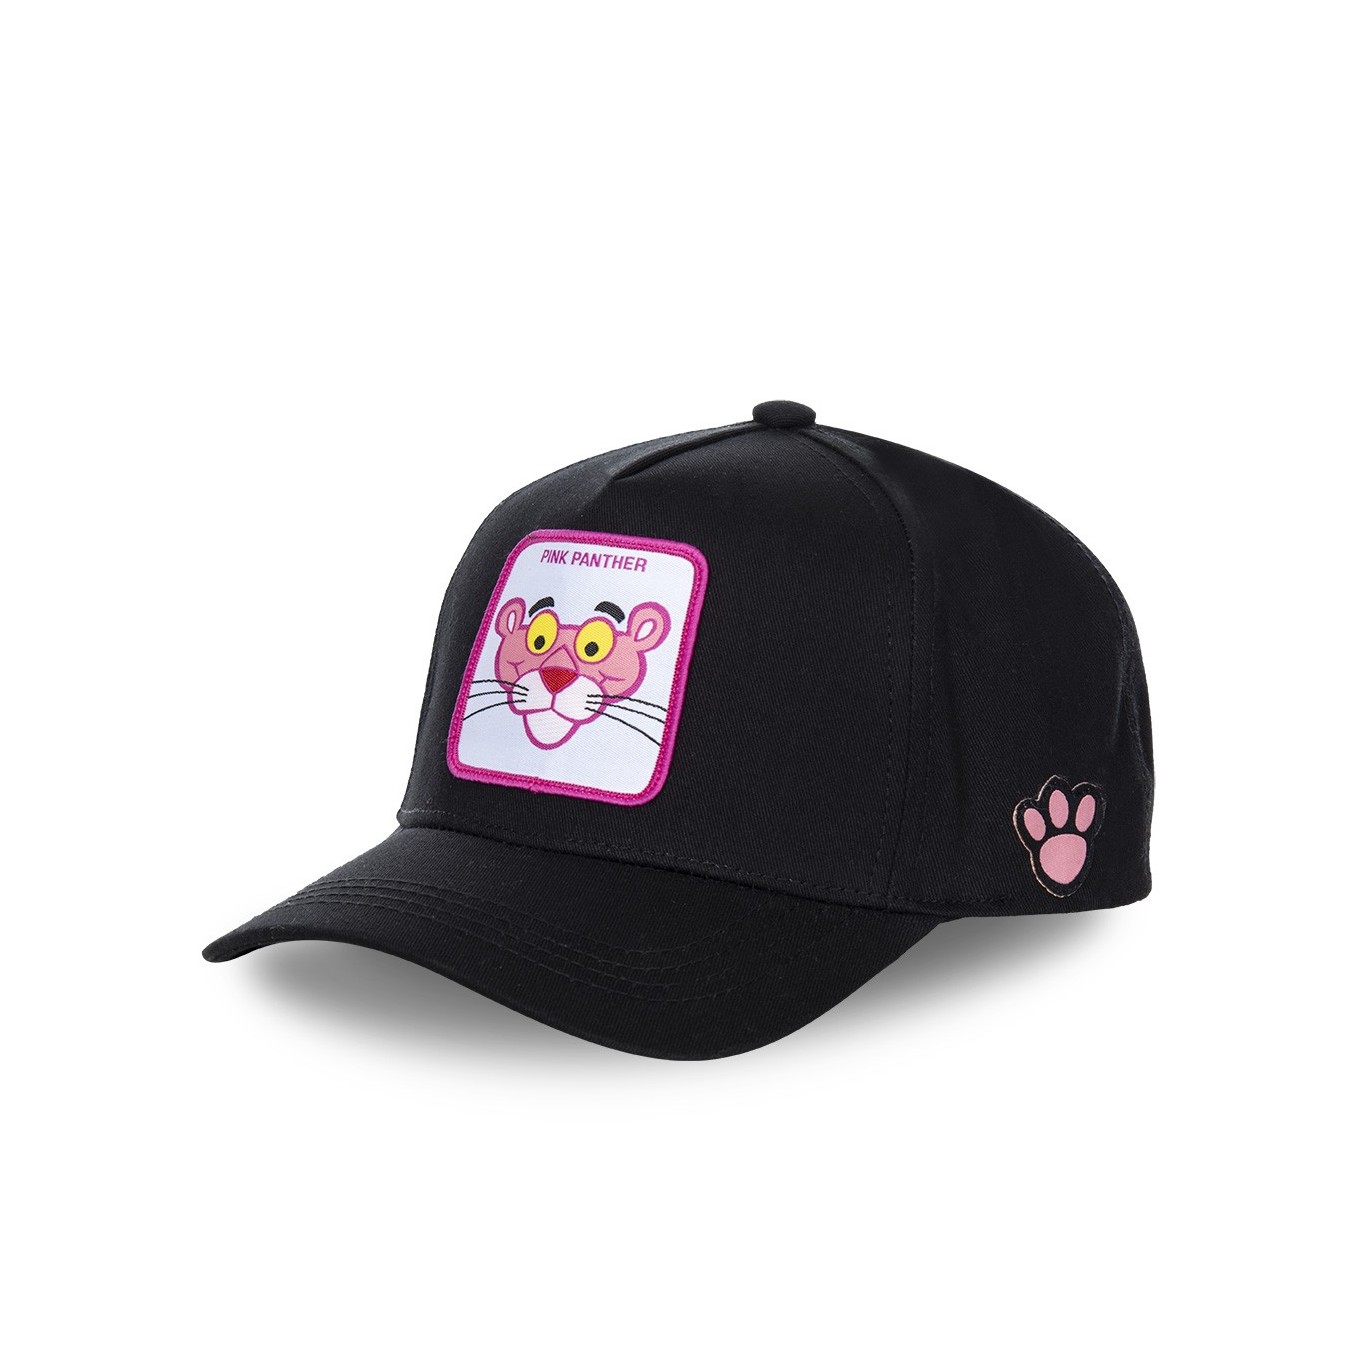 Casquette Capslab Pink Panther Panthere Rose Noir Capslab - 1